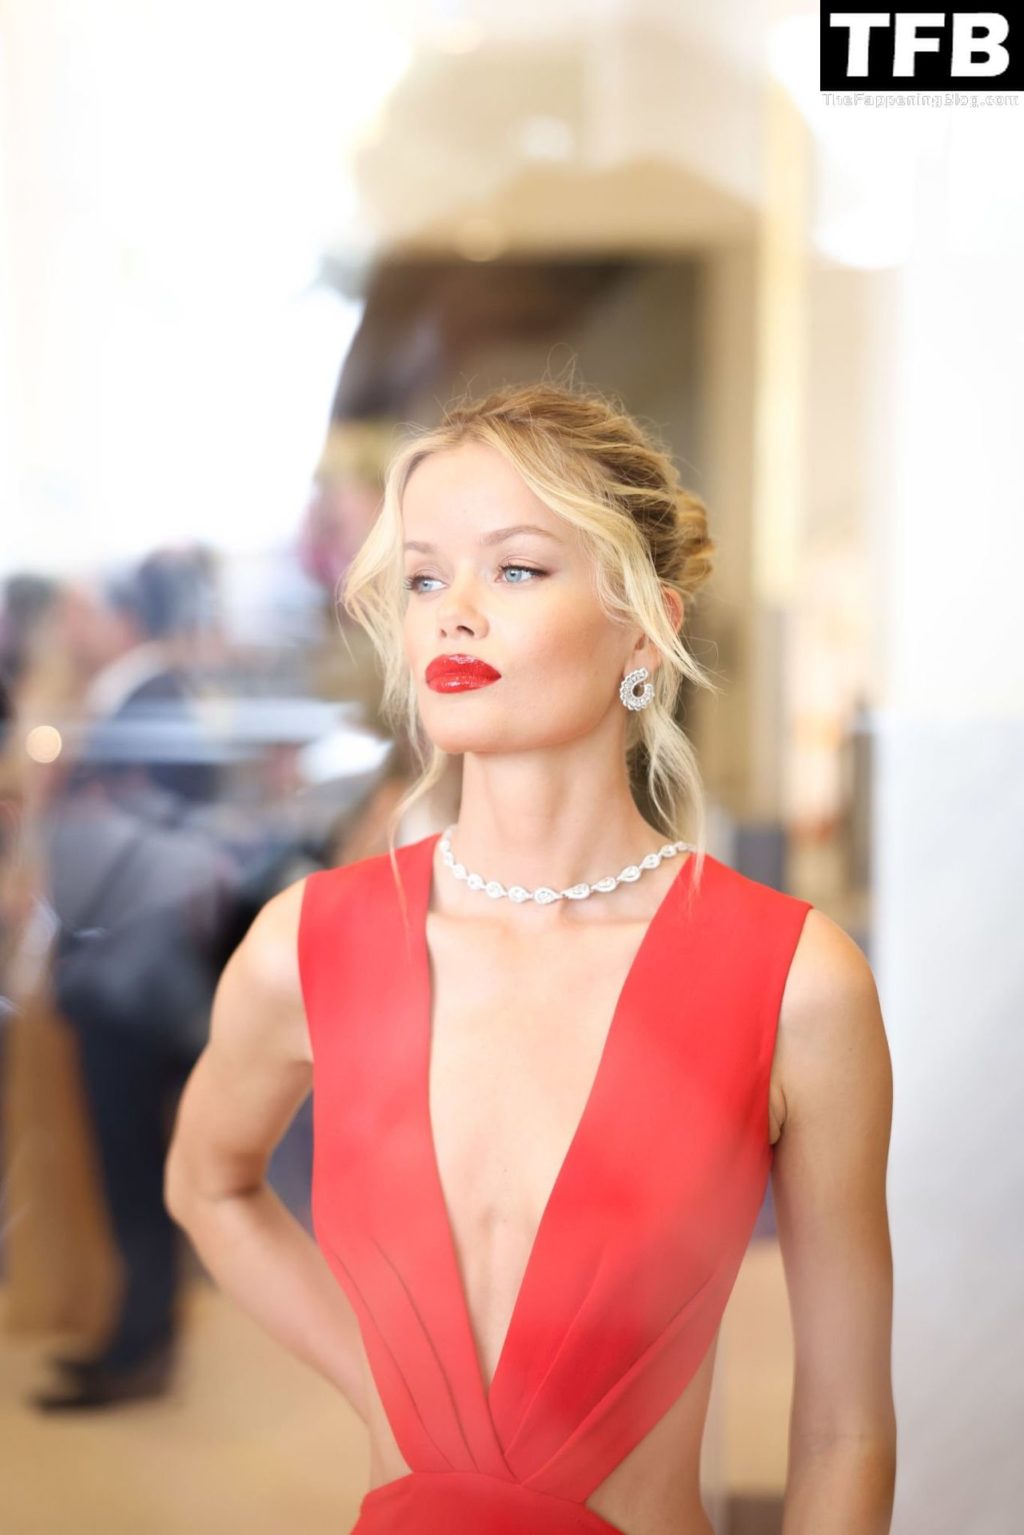 Frida Aasen Sexy The Fappening Blog 107 1024x1535 - Frida Aasen Looks Stunning in a Red Dress at the 75th Annual Cannes Film Festival (153 Photos)